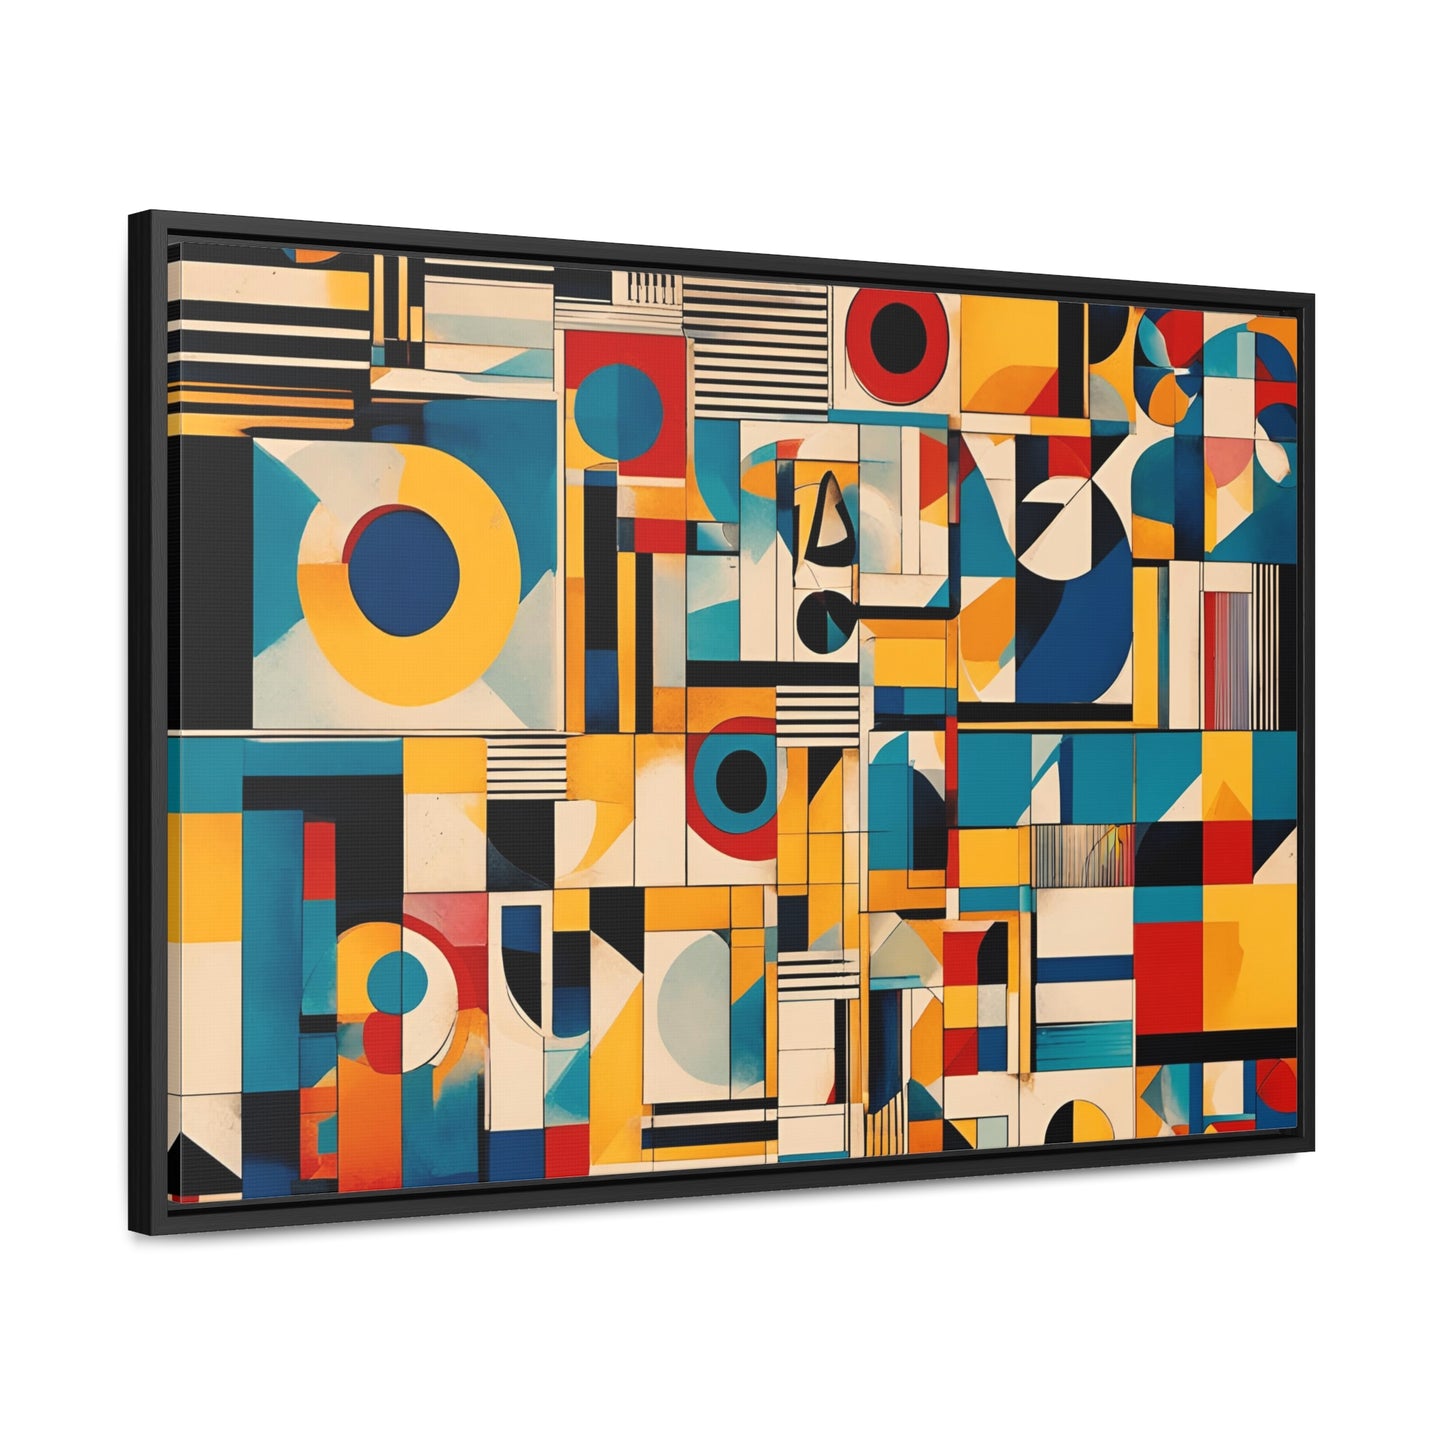 Bold Mid Century Modern Wall Art Print on Canvas in a Floating Frame